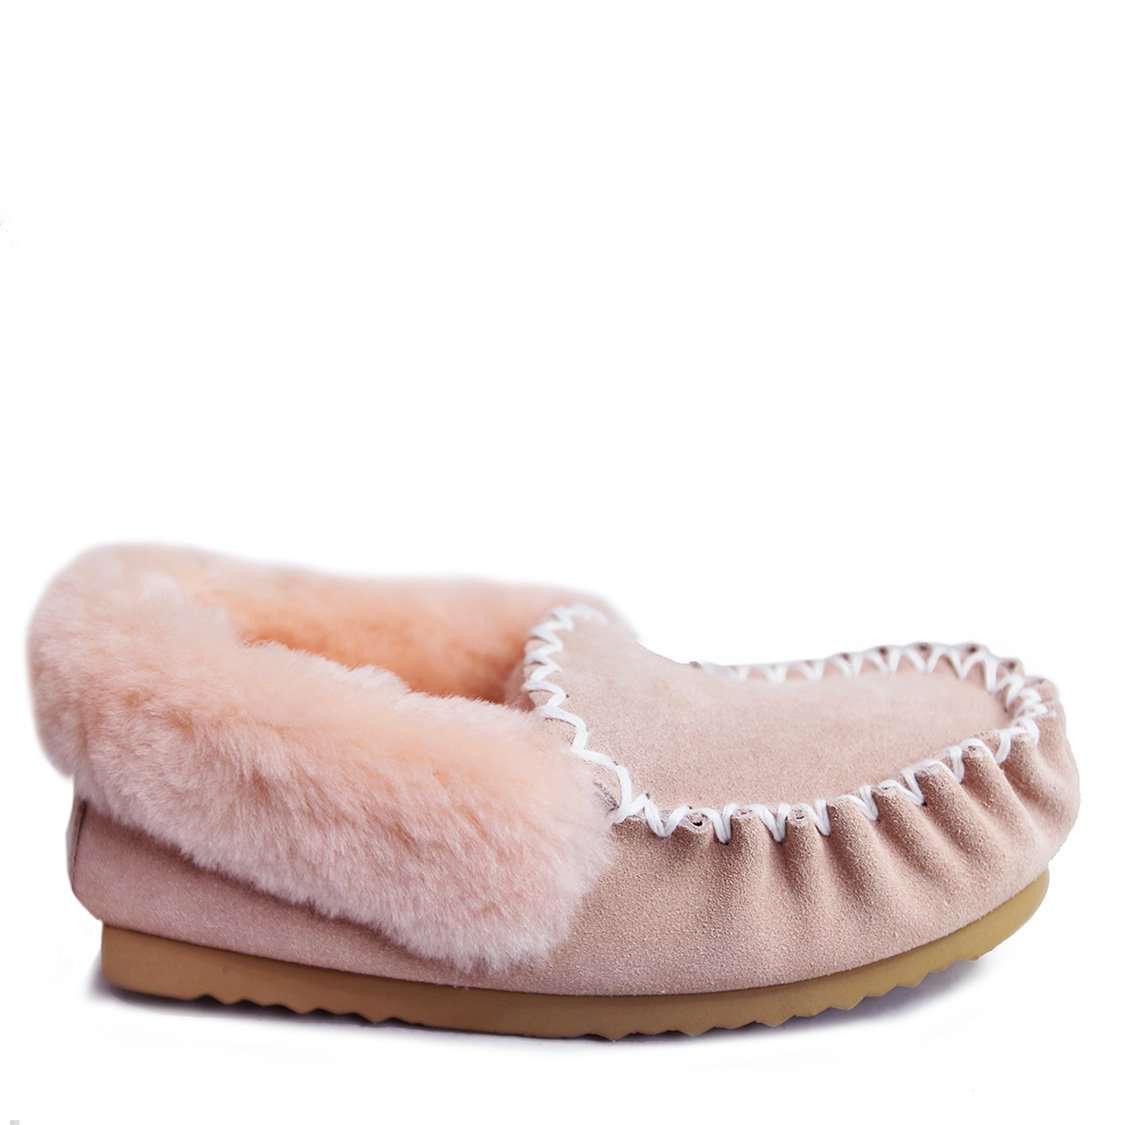 Traditional Moccasin – Ugg Boots Australia